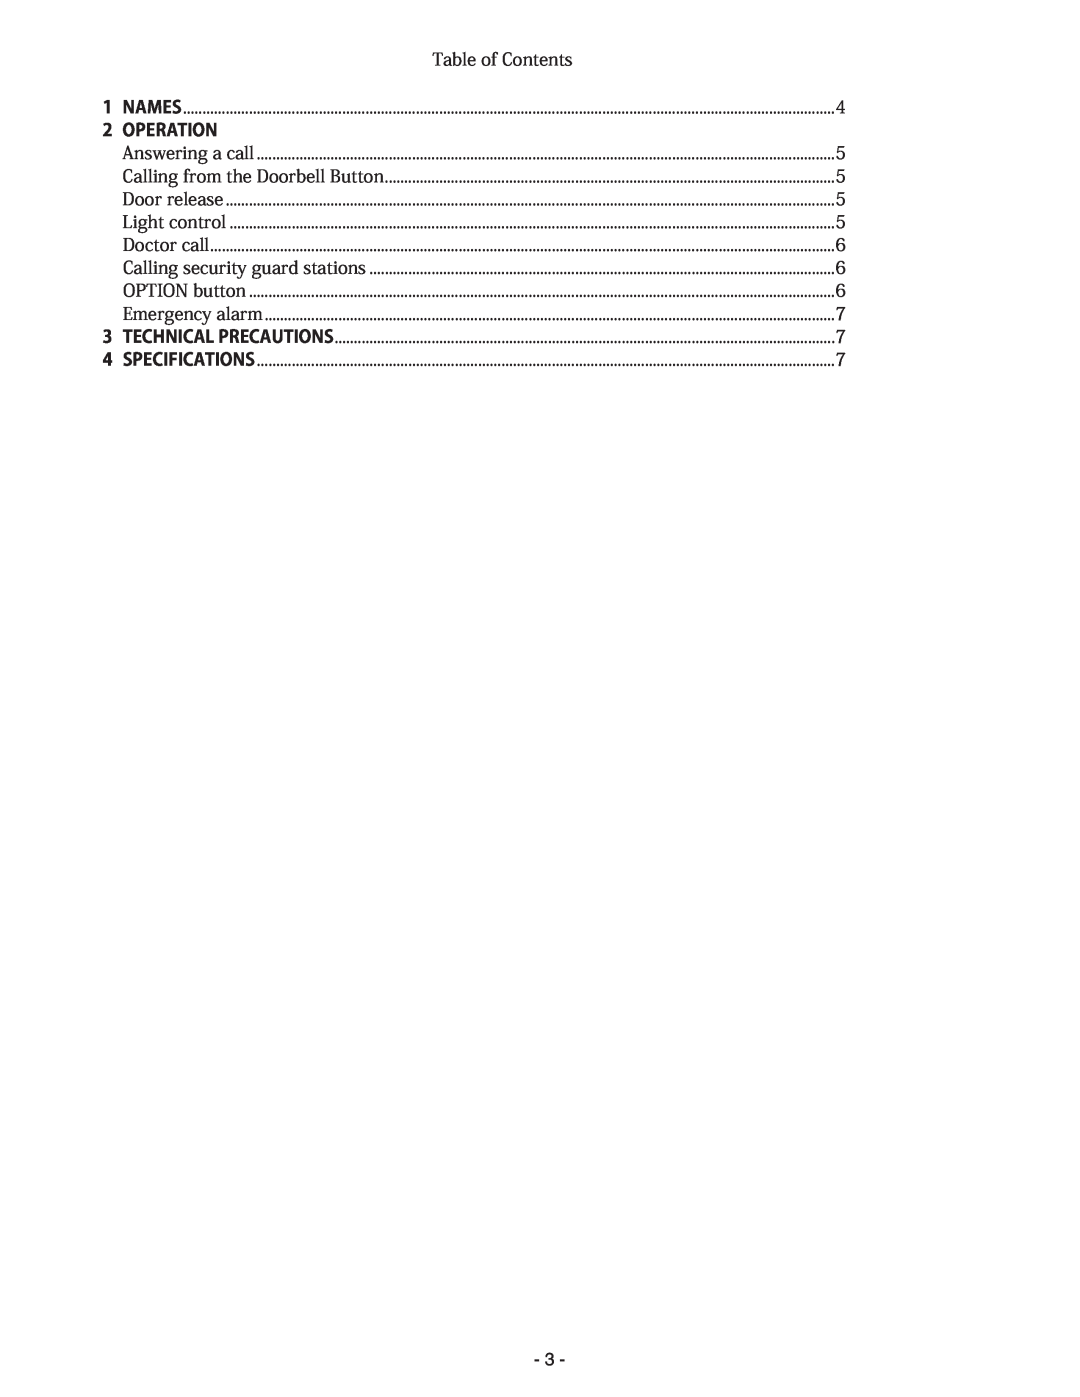 Aiphone GT-1D service manual Table of Contents, Operation 